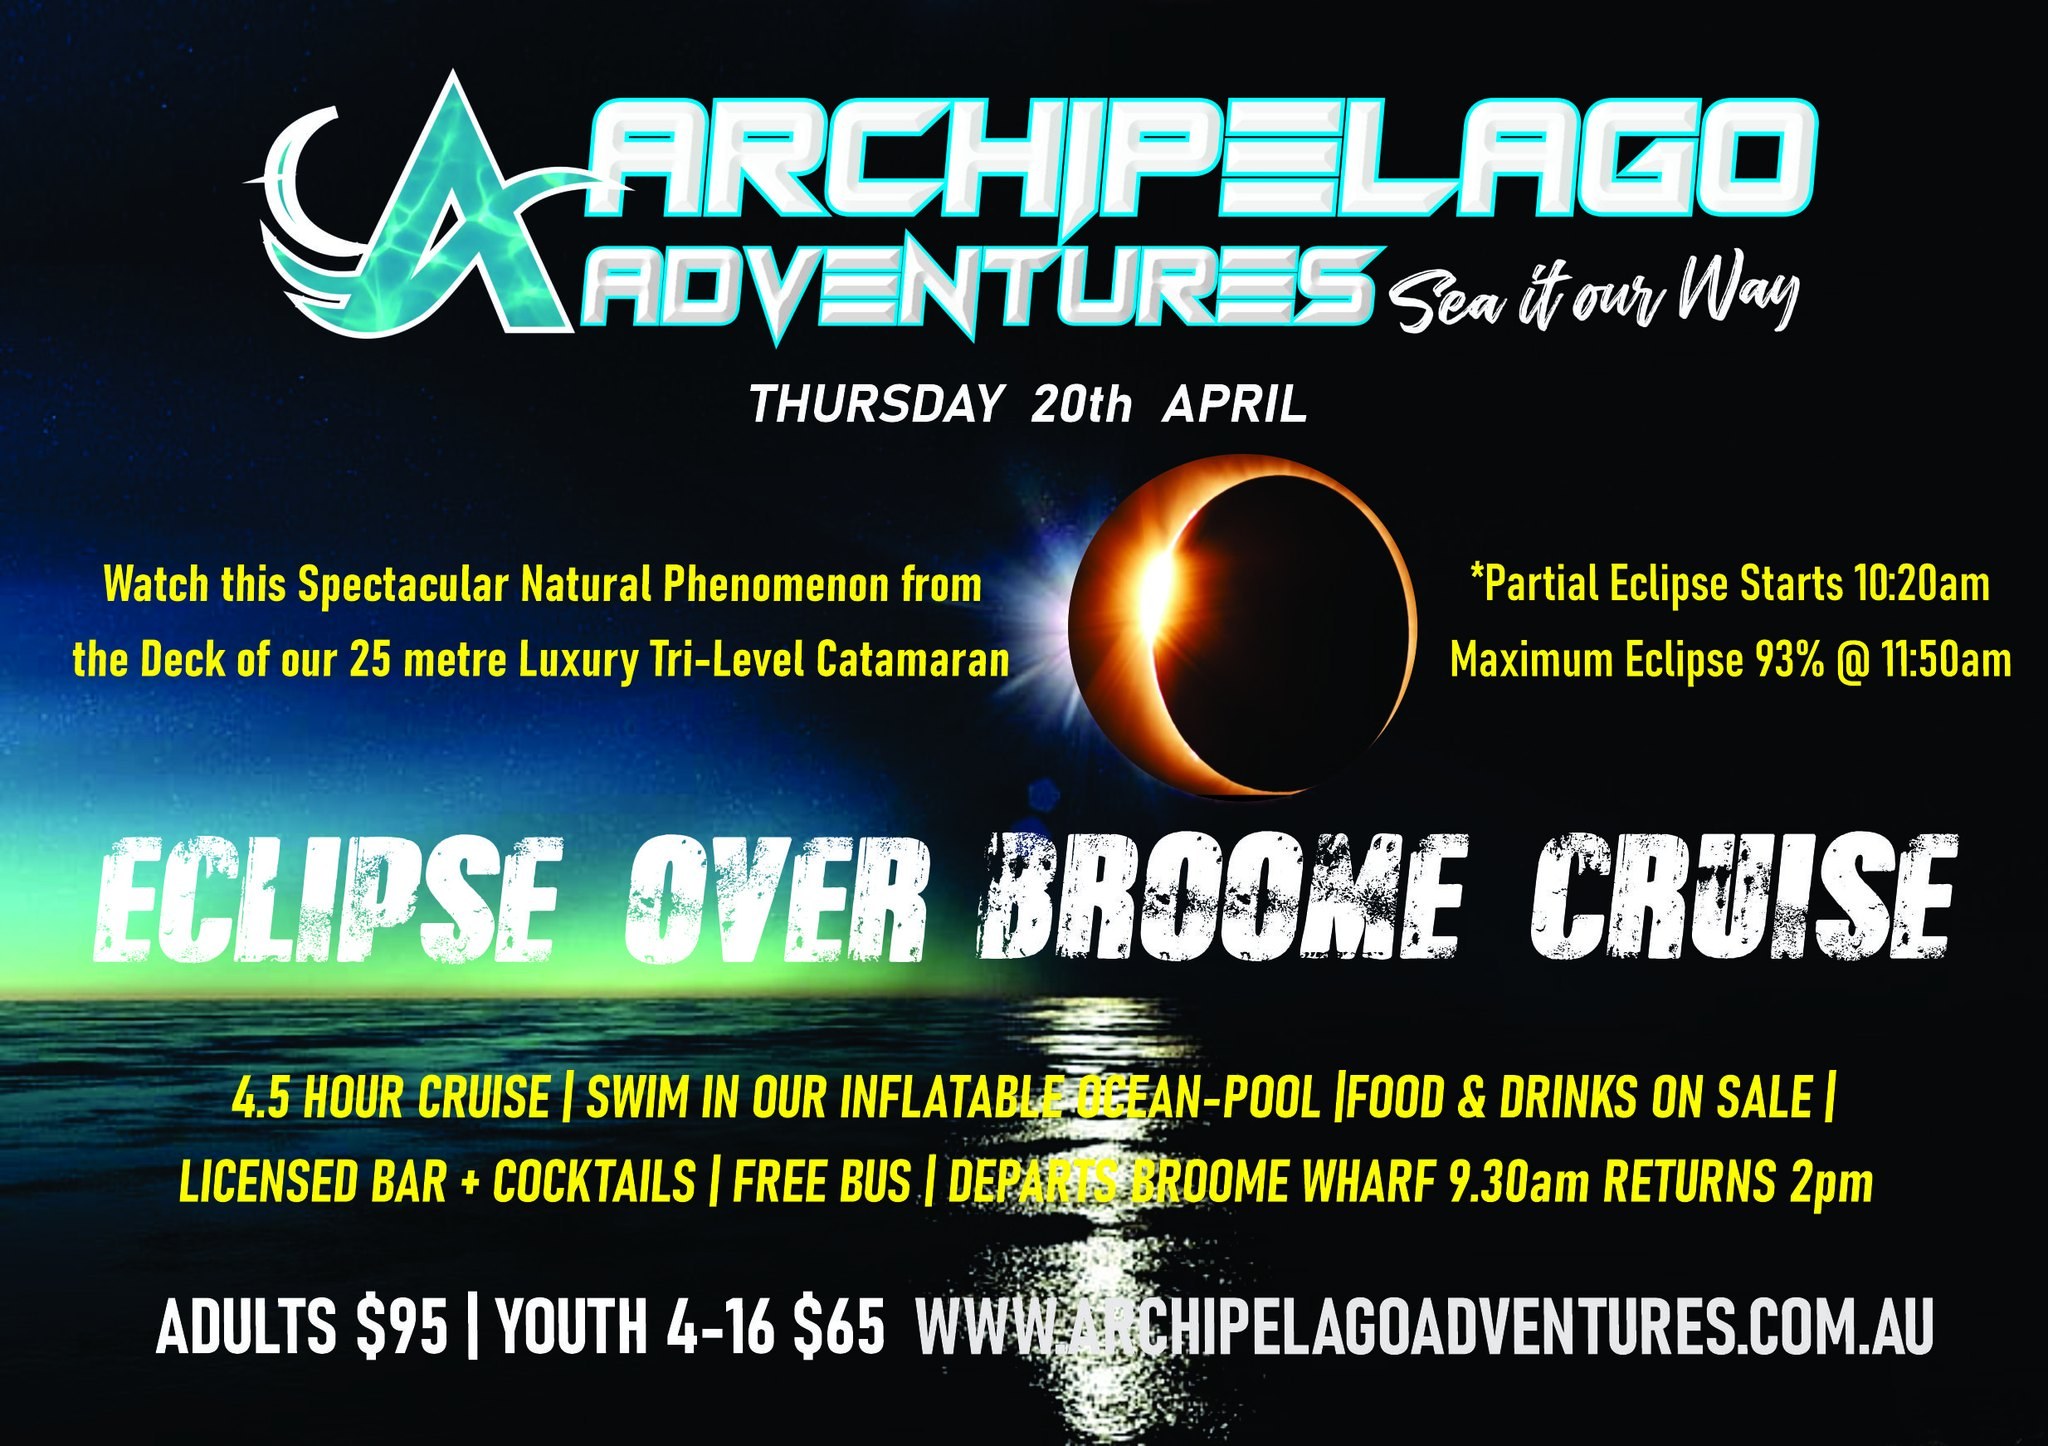 4.5 hour cruise, experiencing the 'Spectacular Natural Phenomenon of a Solar Eclipse'